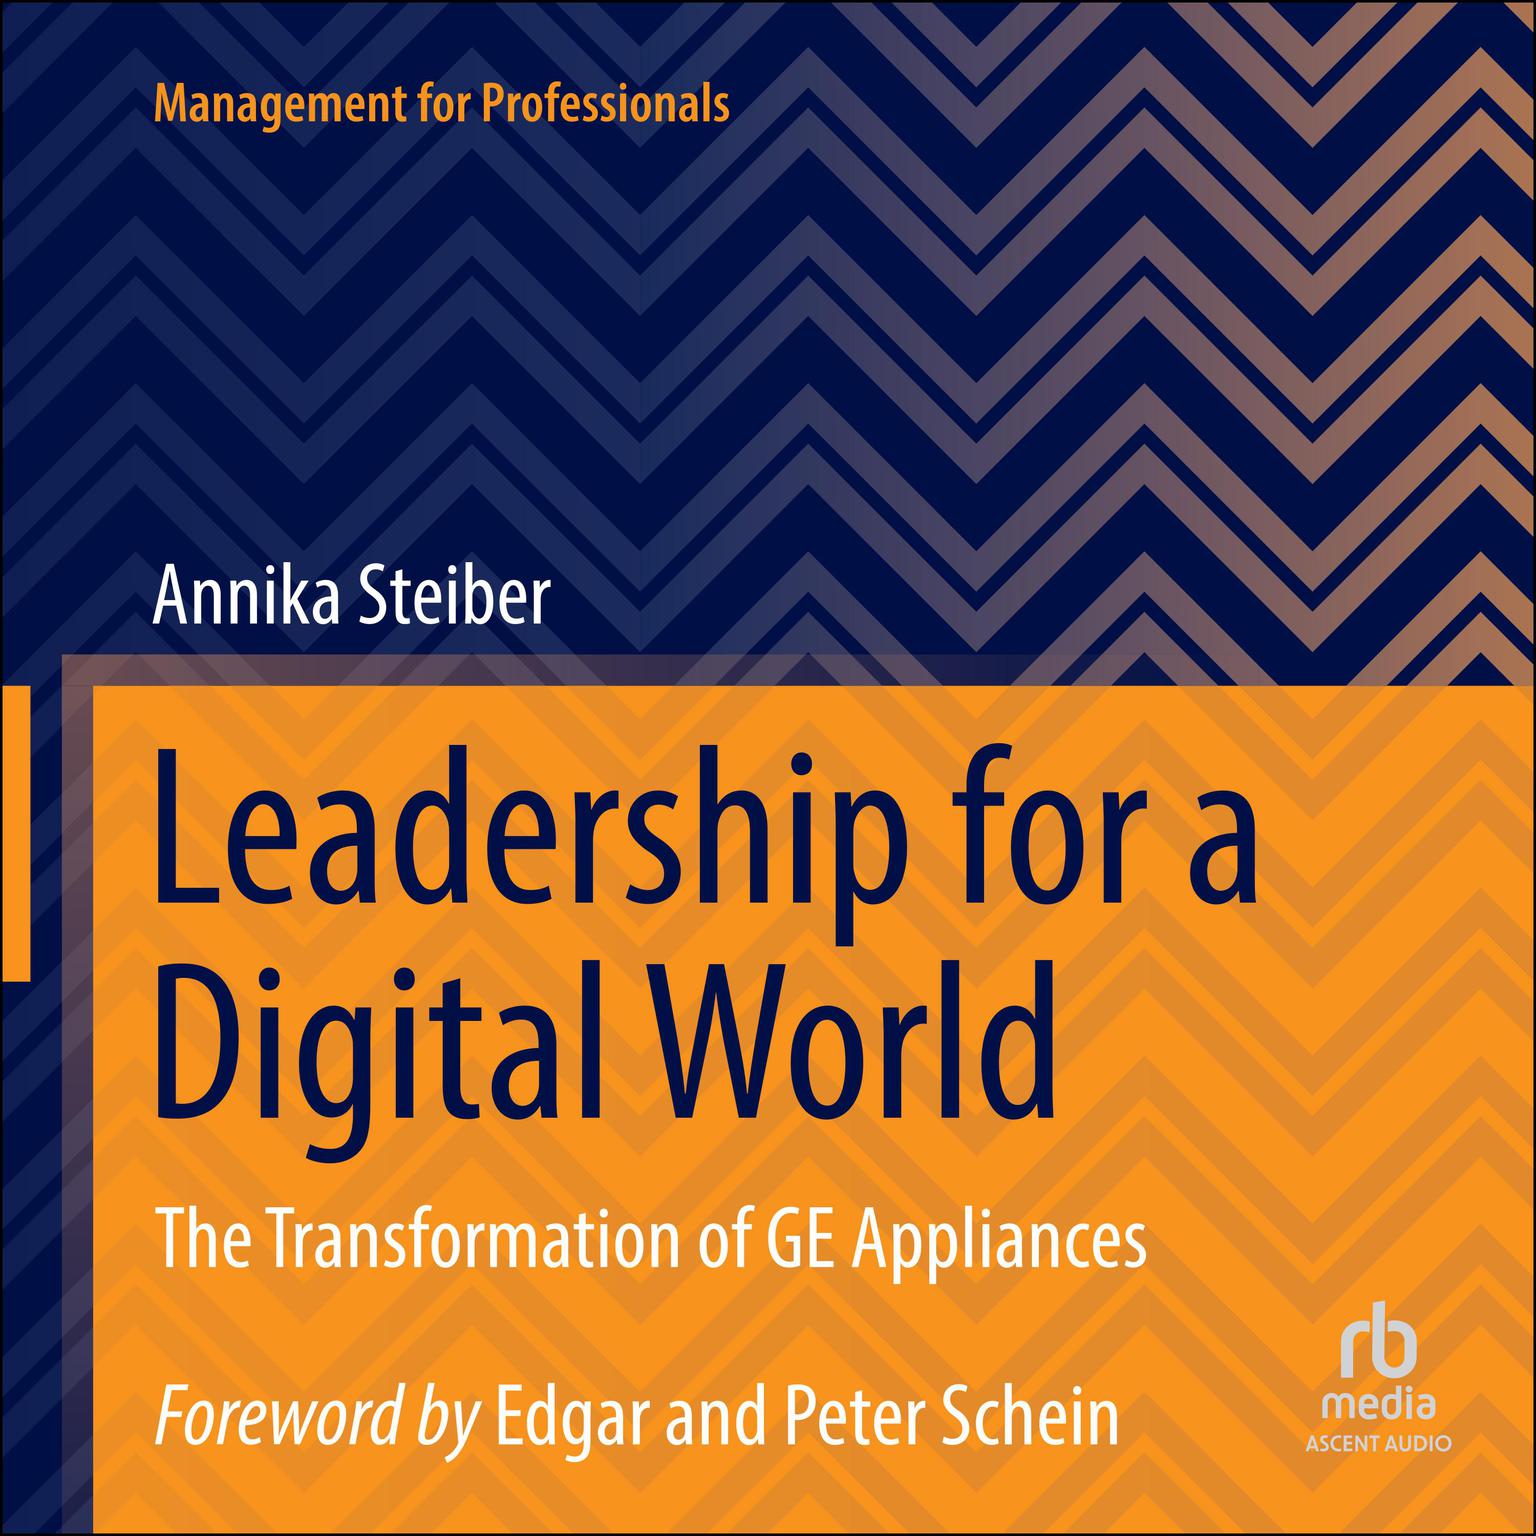 Leadership for a Digital World: The Transformation of GE Appliances Audiobook, by Annika Steiber